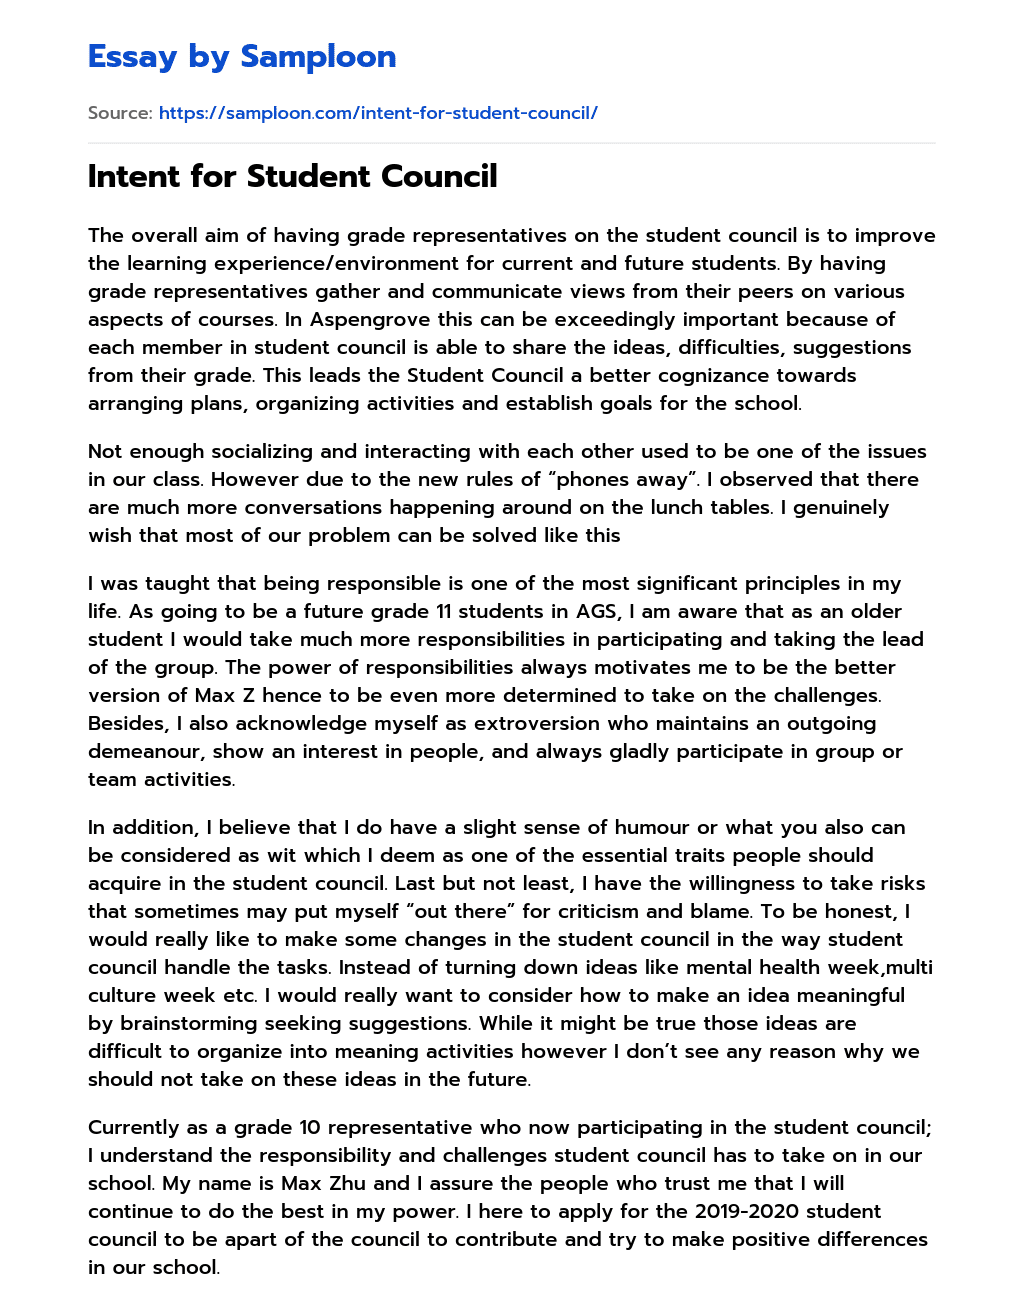 Intent for Student Council essay